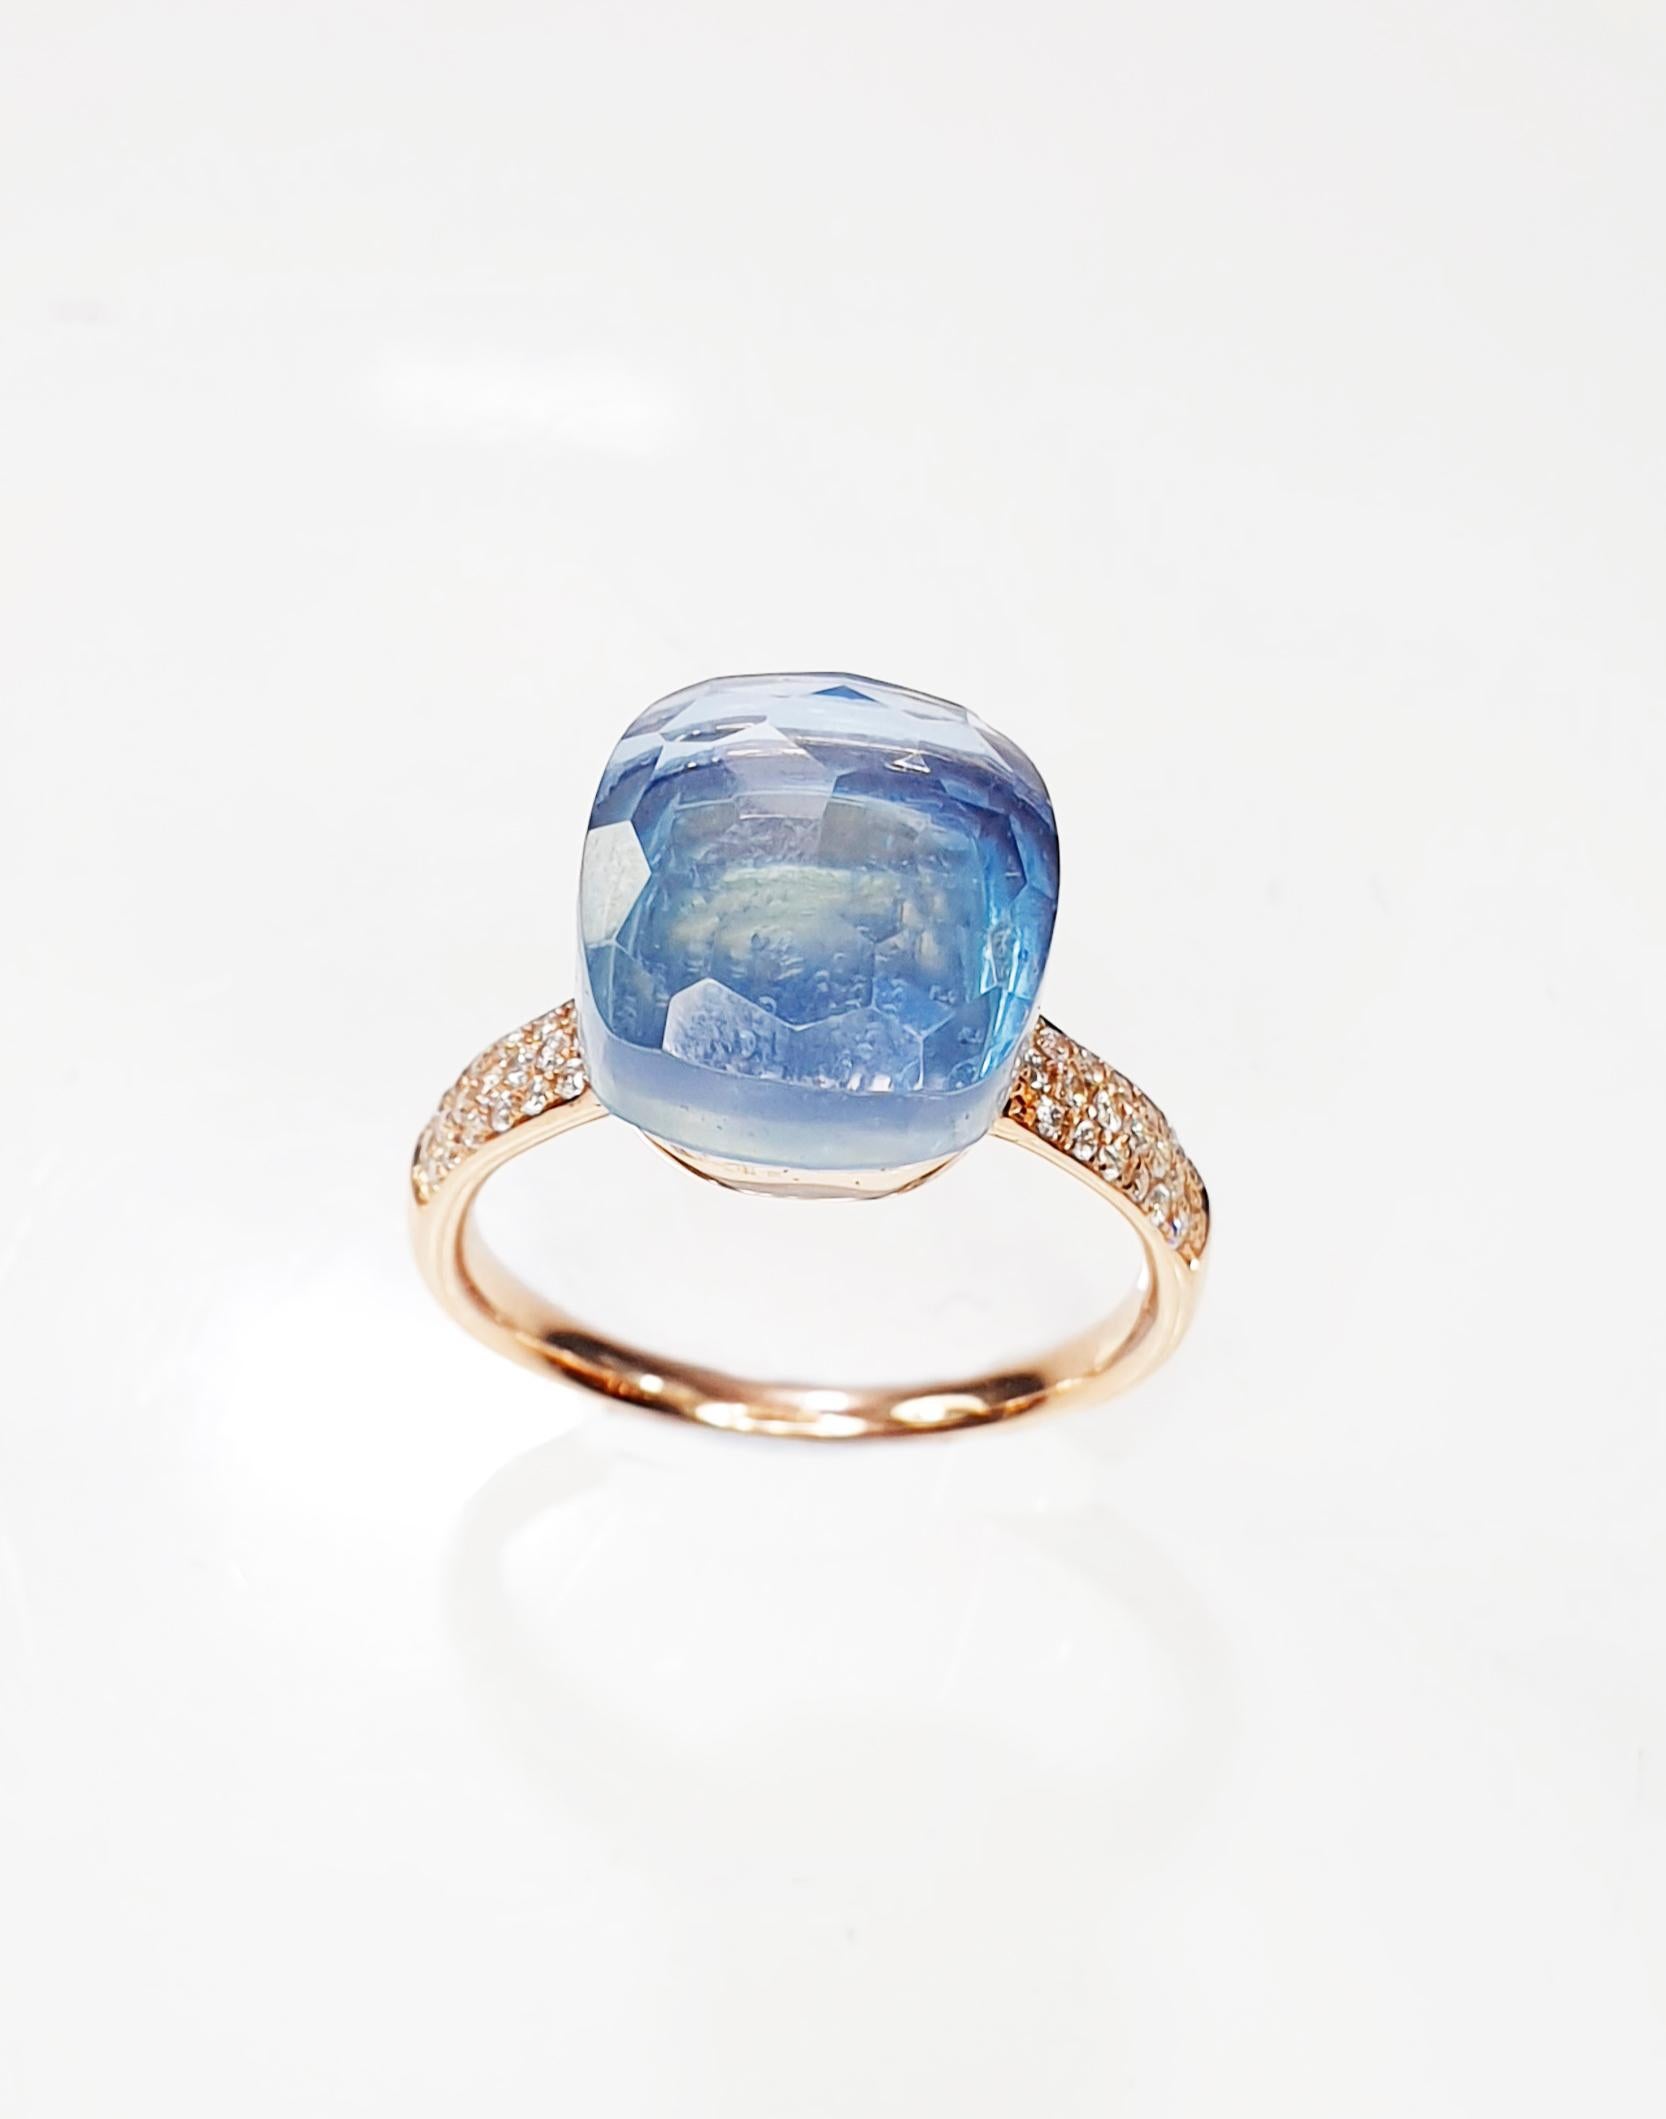 Multifaceted Medium Blue Splash Topaz in 18k rose or yellow  gold and pavé of diamonds ring 
Rings and earrings in a varied selection of 18 colours and gems see below
◘ Weight 5gr
◘ measures: width  10,5x10,5 mm or  .413x.413 inches  height 5mm/